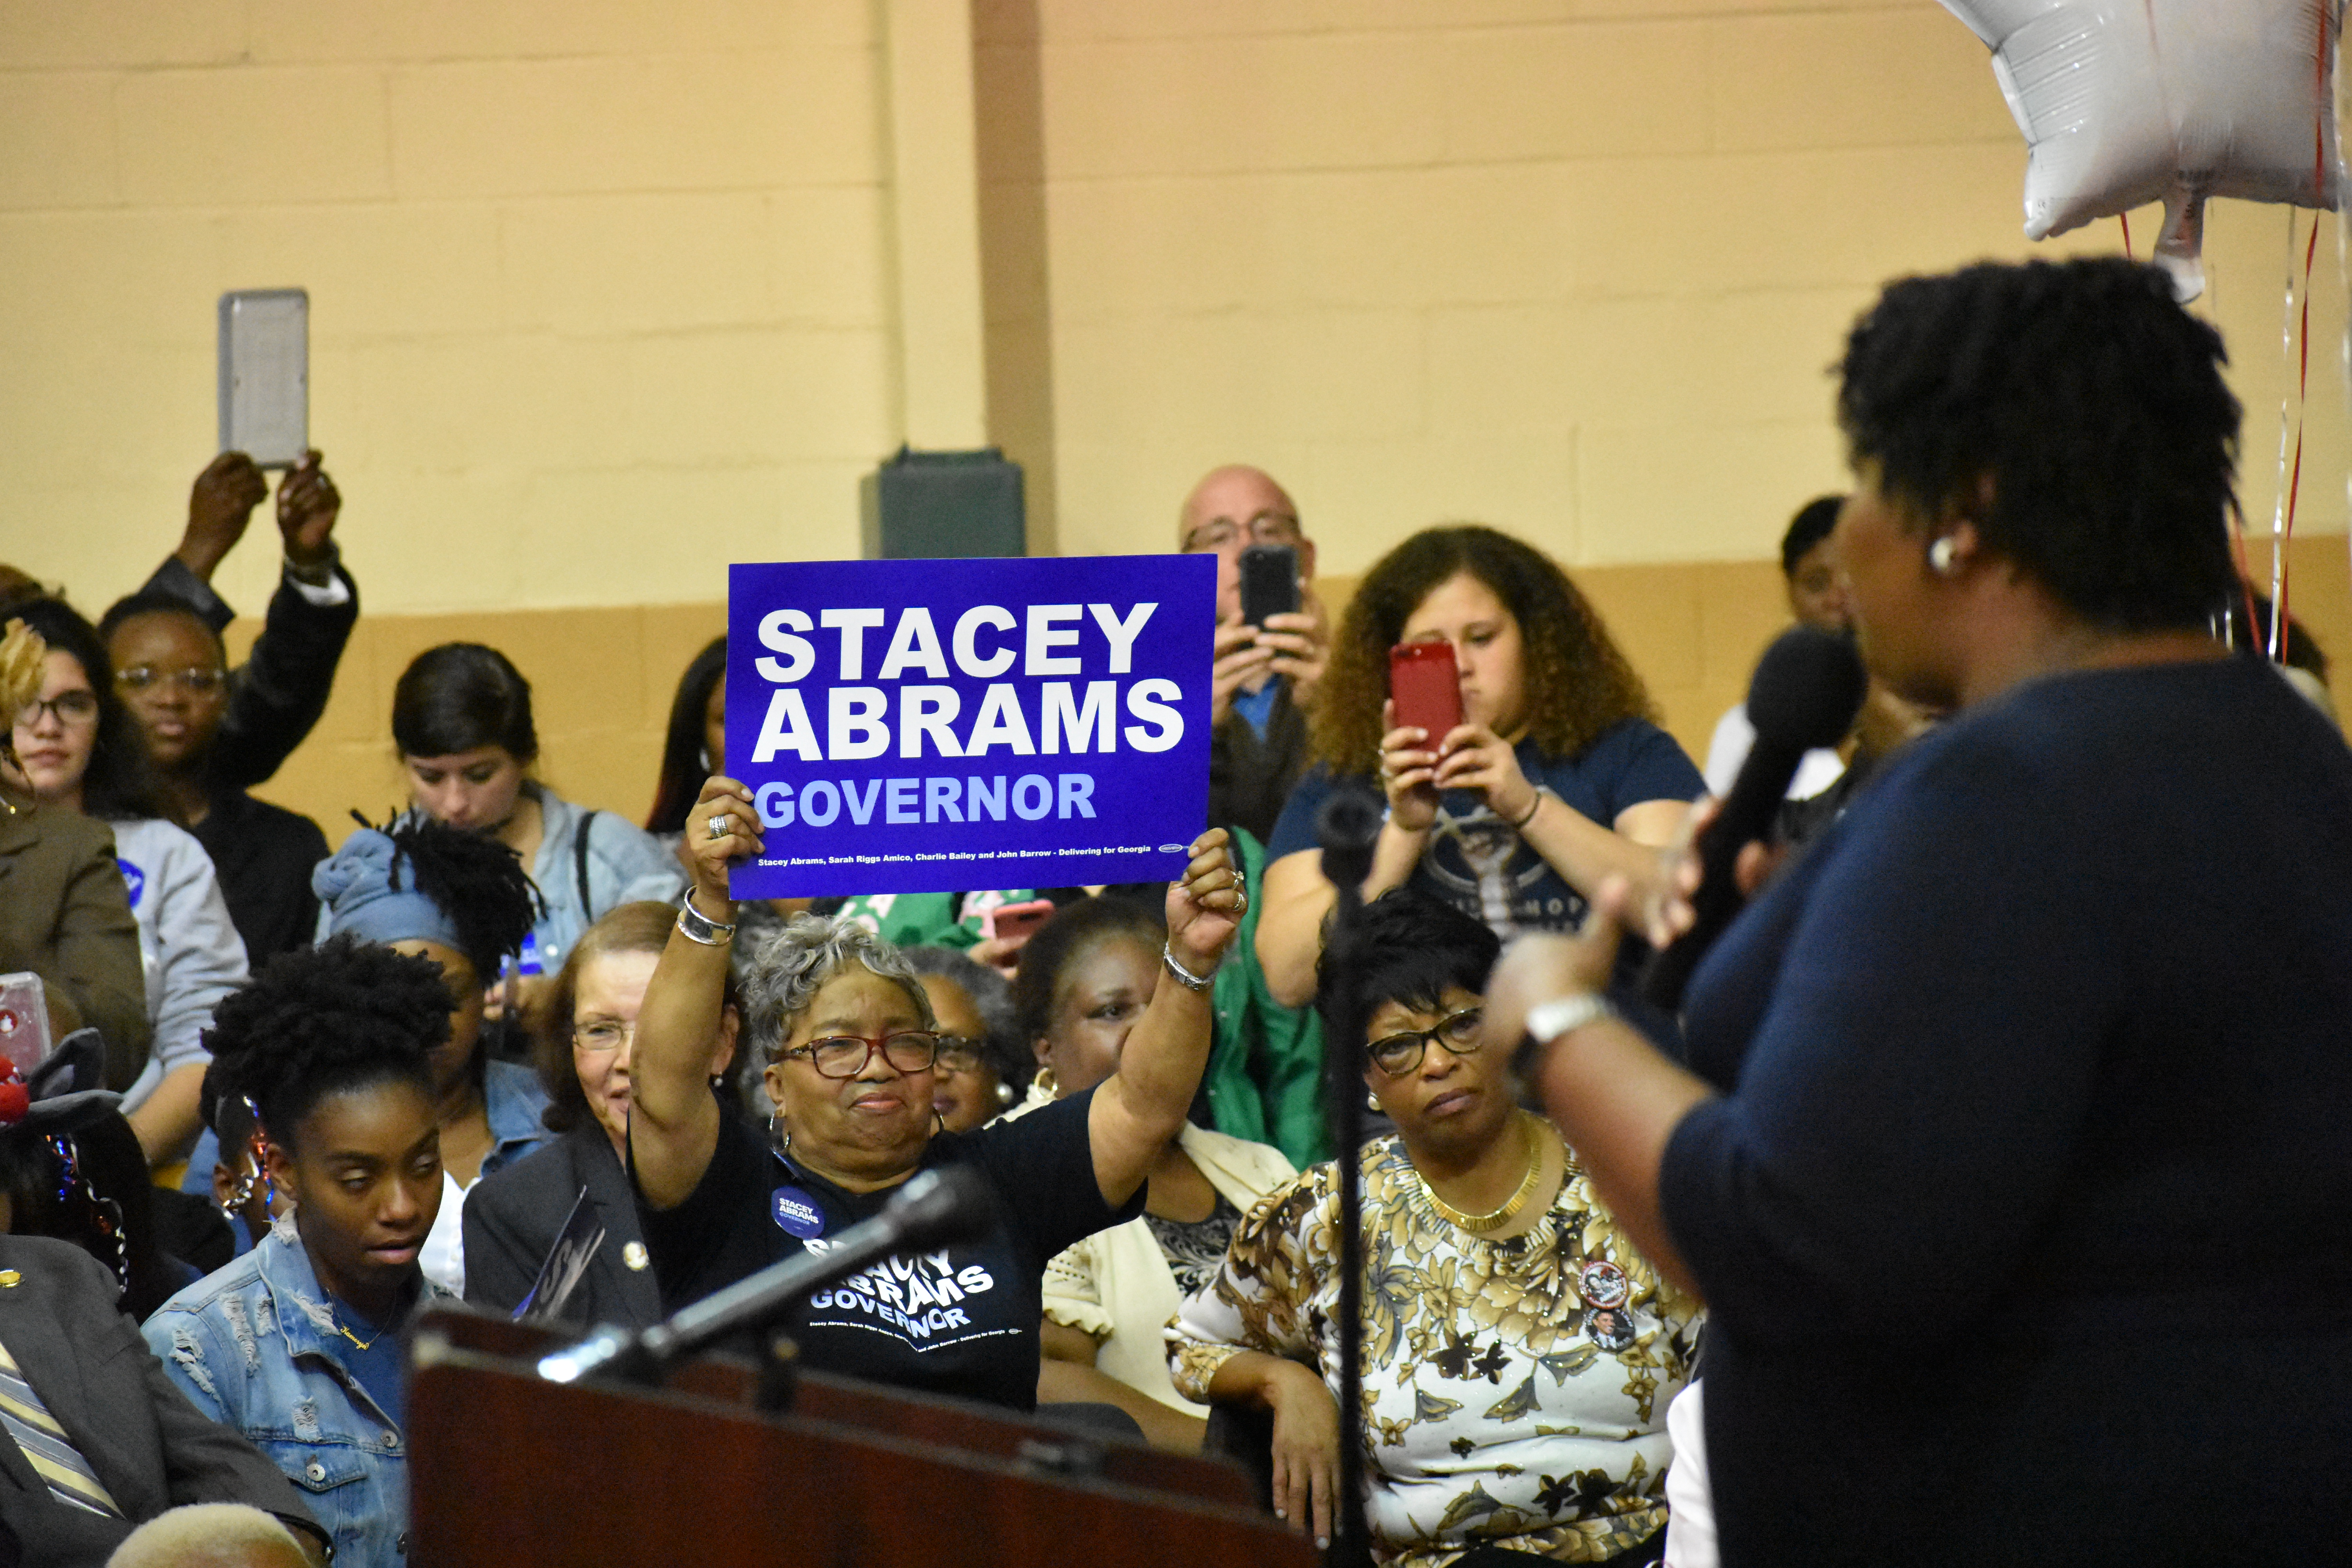 Stacey Abrams addresses a crowd.